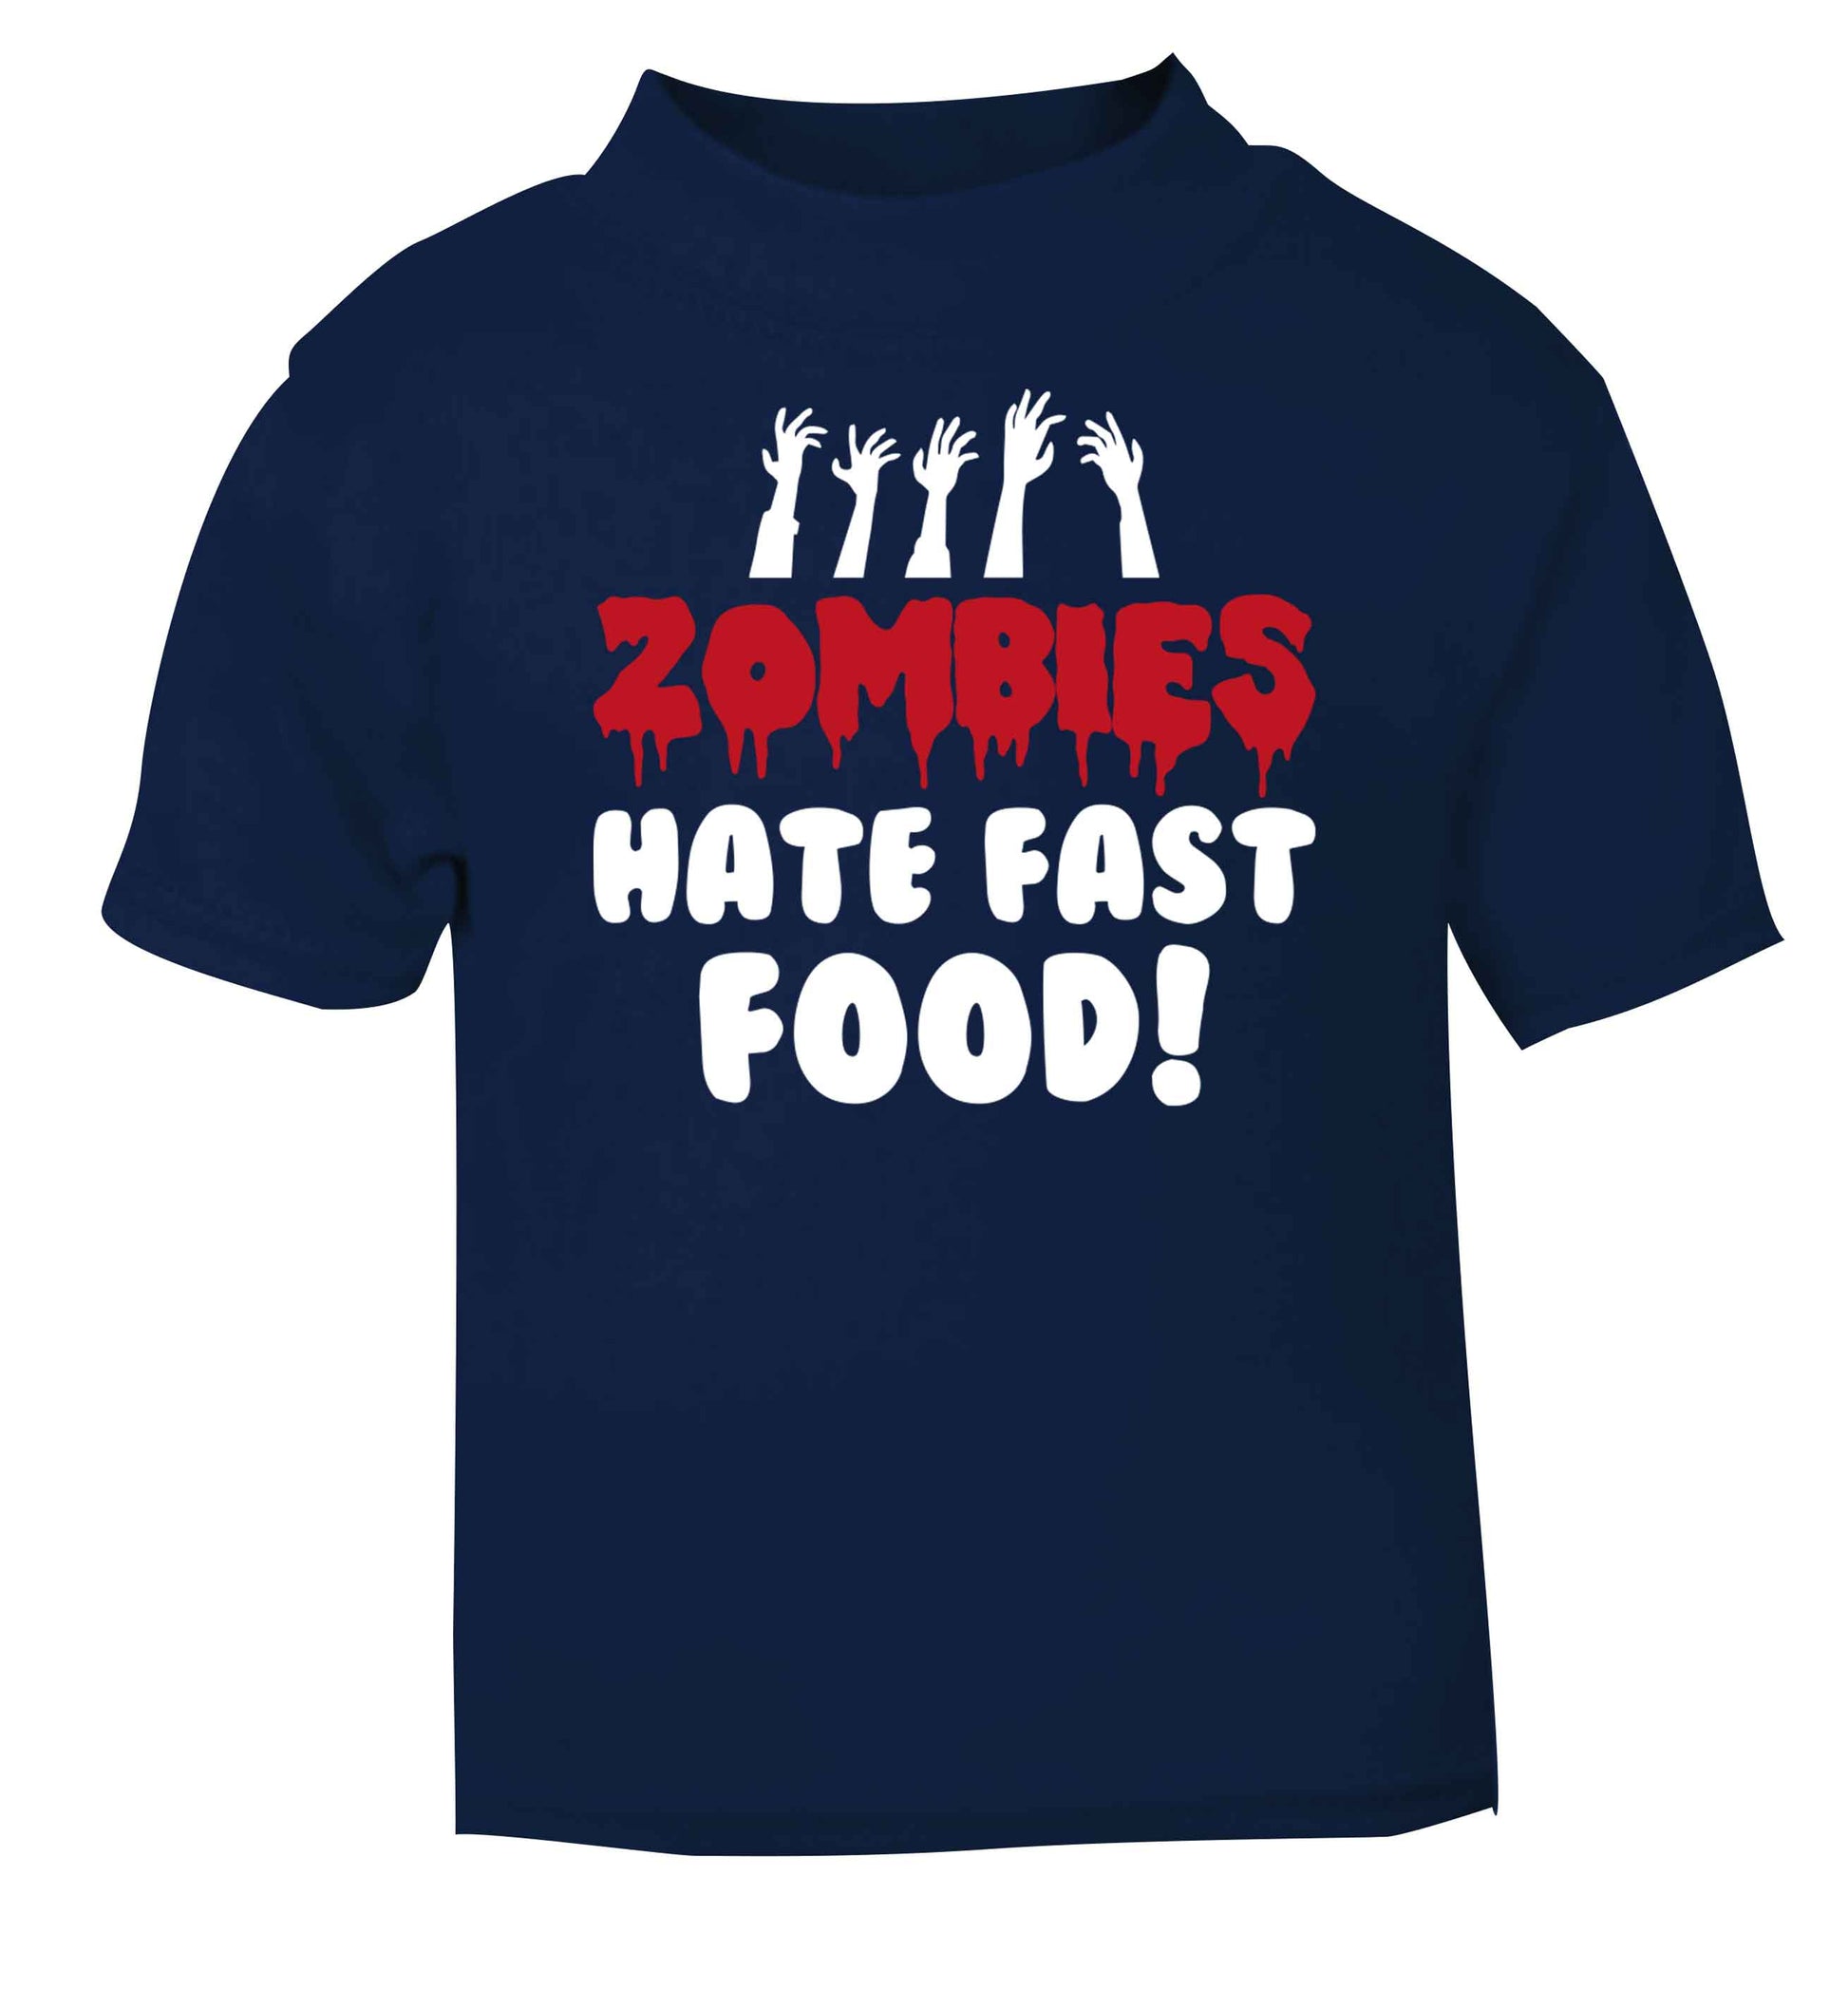 Zombies hate fast food navy baby toddler Tshirt 2 Years